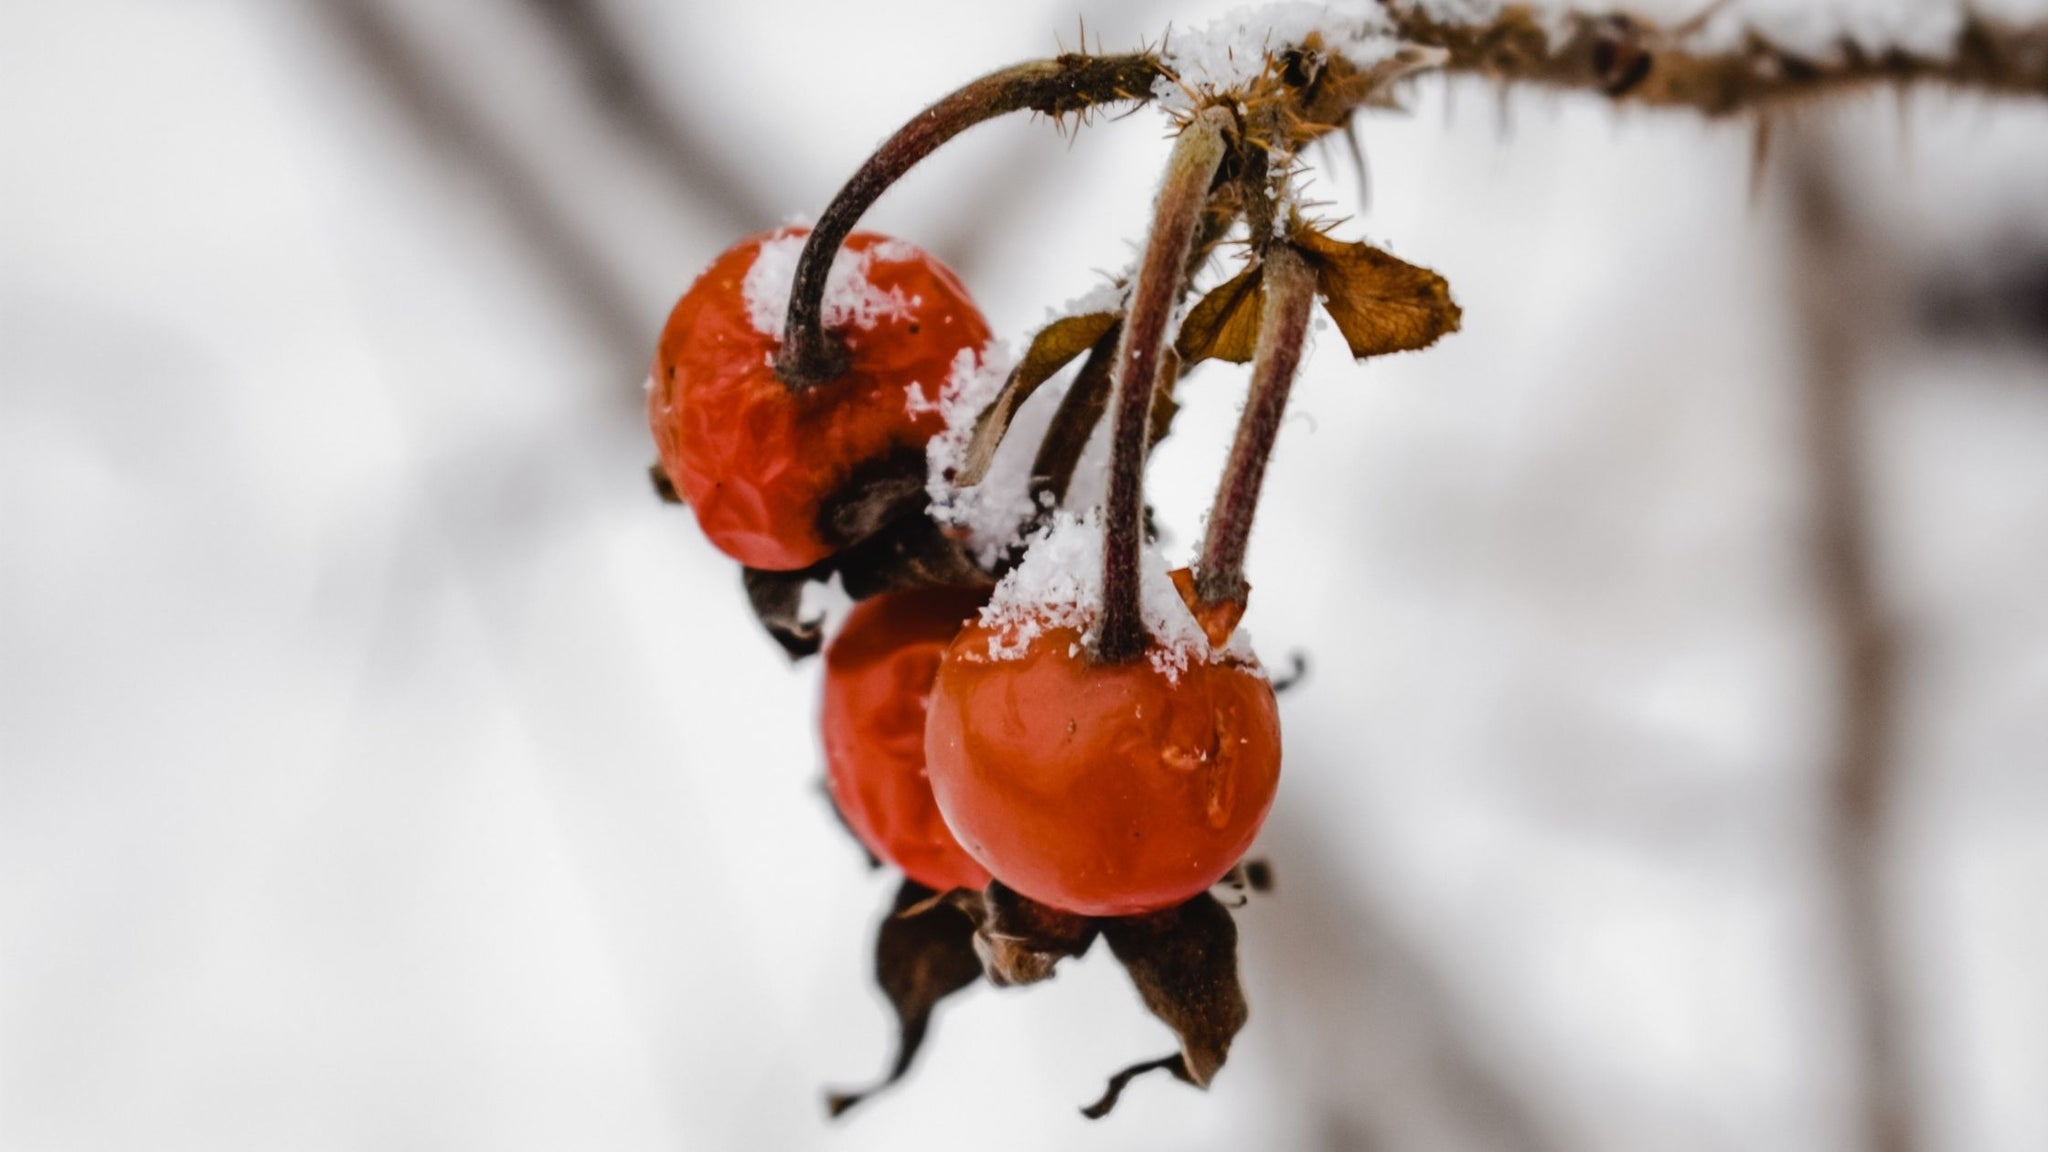 Rosehip Oil: The natural oil everyone is going gaga over